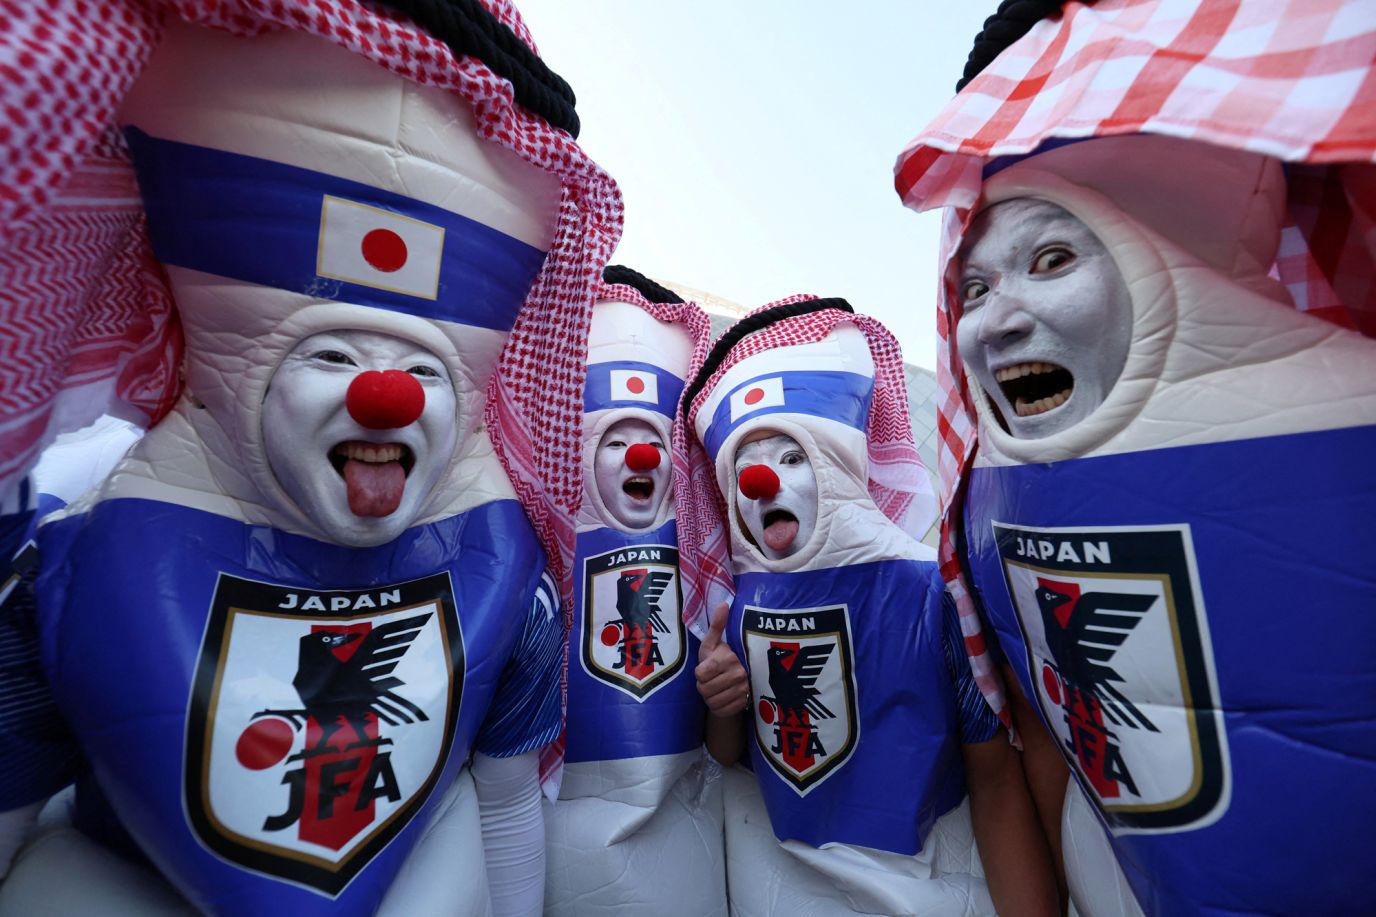 Japanese fans gather in Doha, Qatar, before a World Cup match against Germany on Wednesday, November 23.